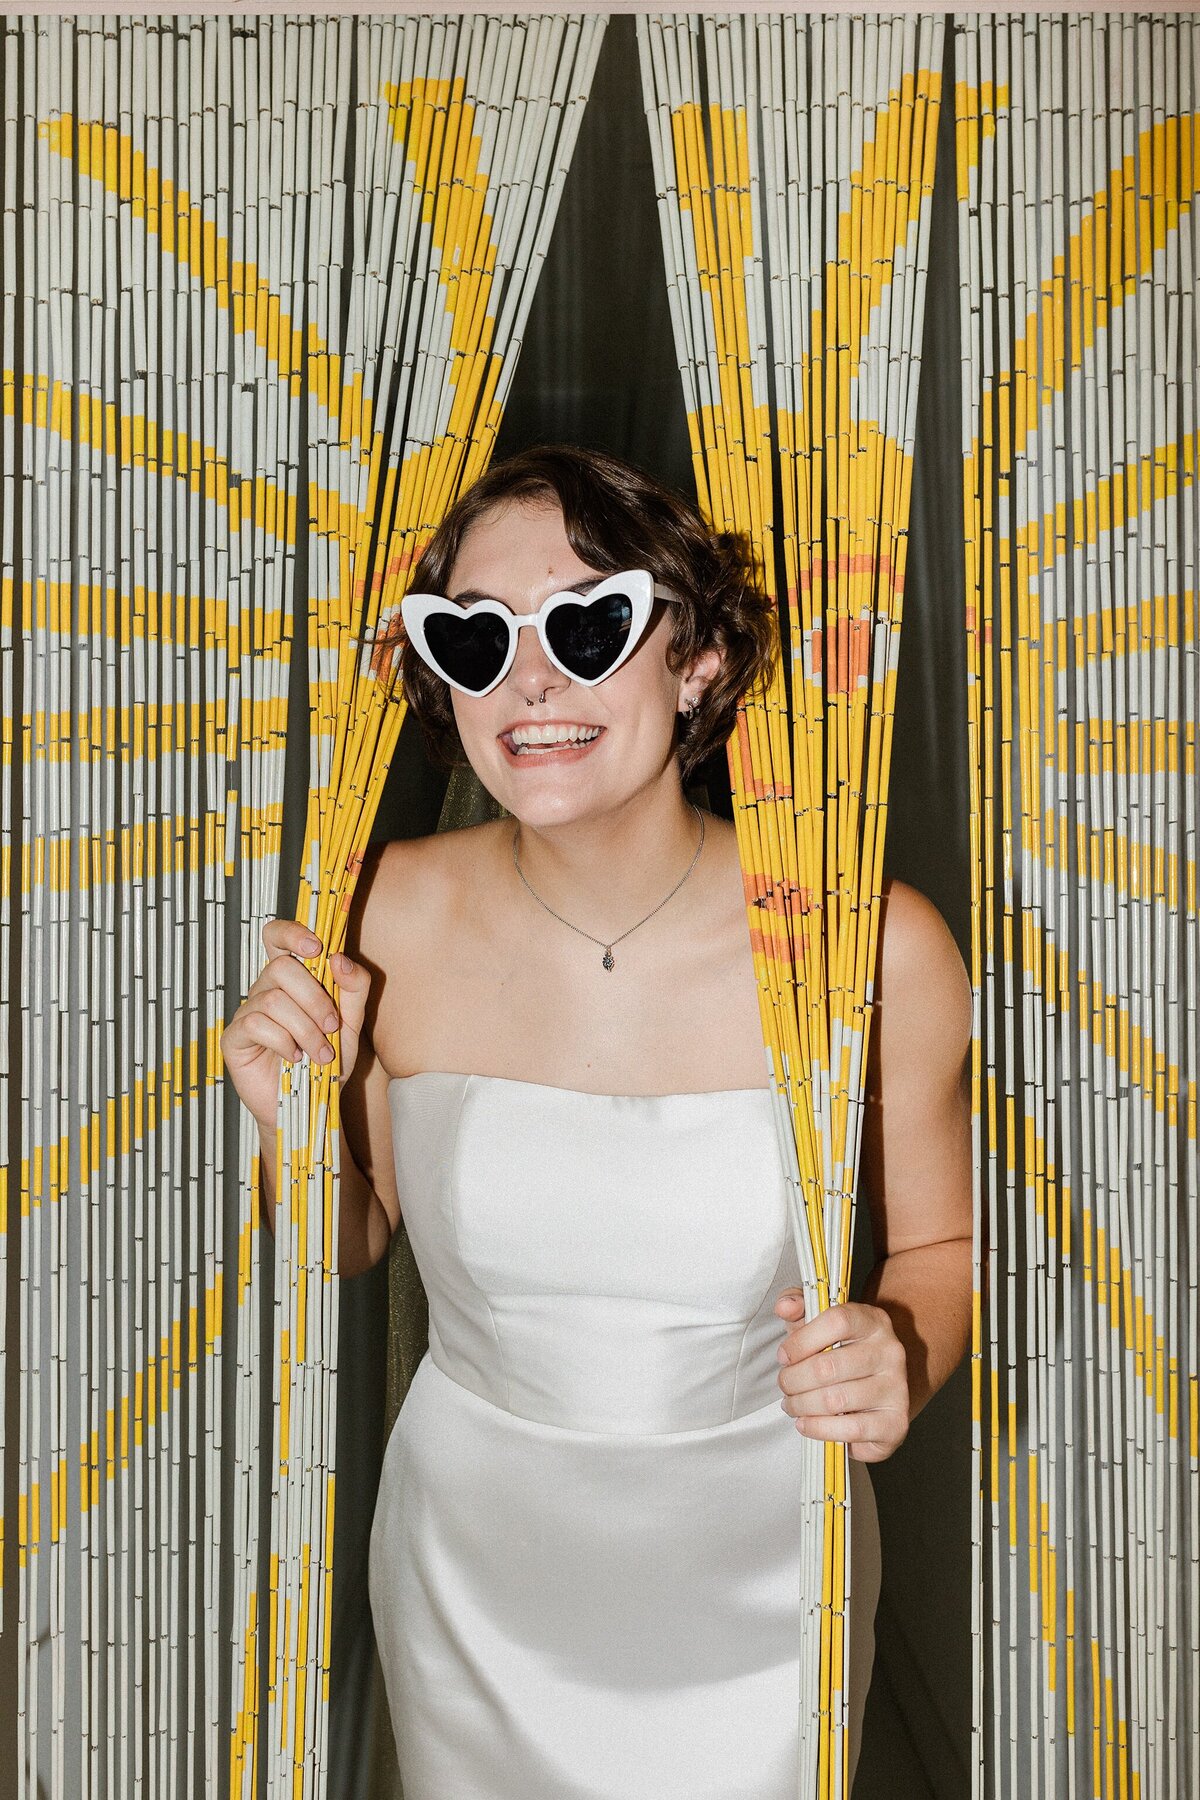 A portrait of a bride peering through a sun themed beaded doorway. The bride is wearing a simple yet elegant, sleeveless, white dress and white, heart-shaped sunglasses.